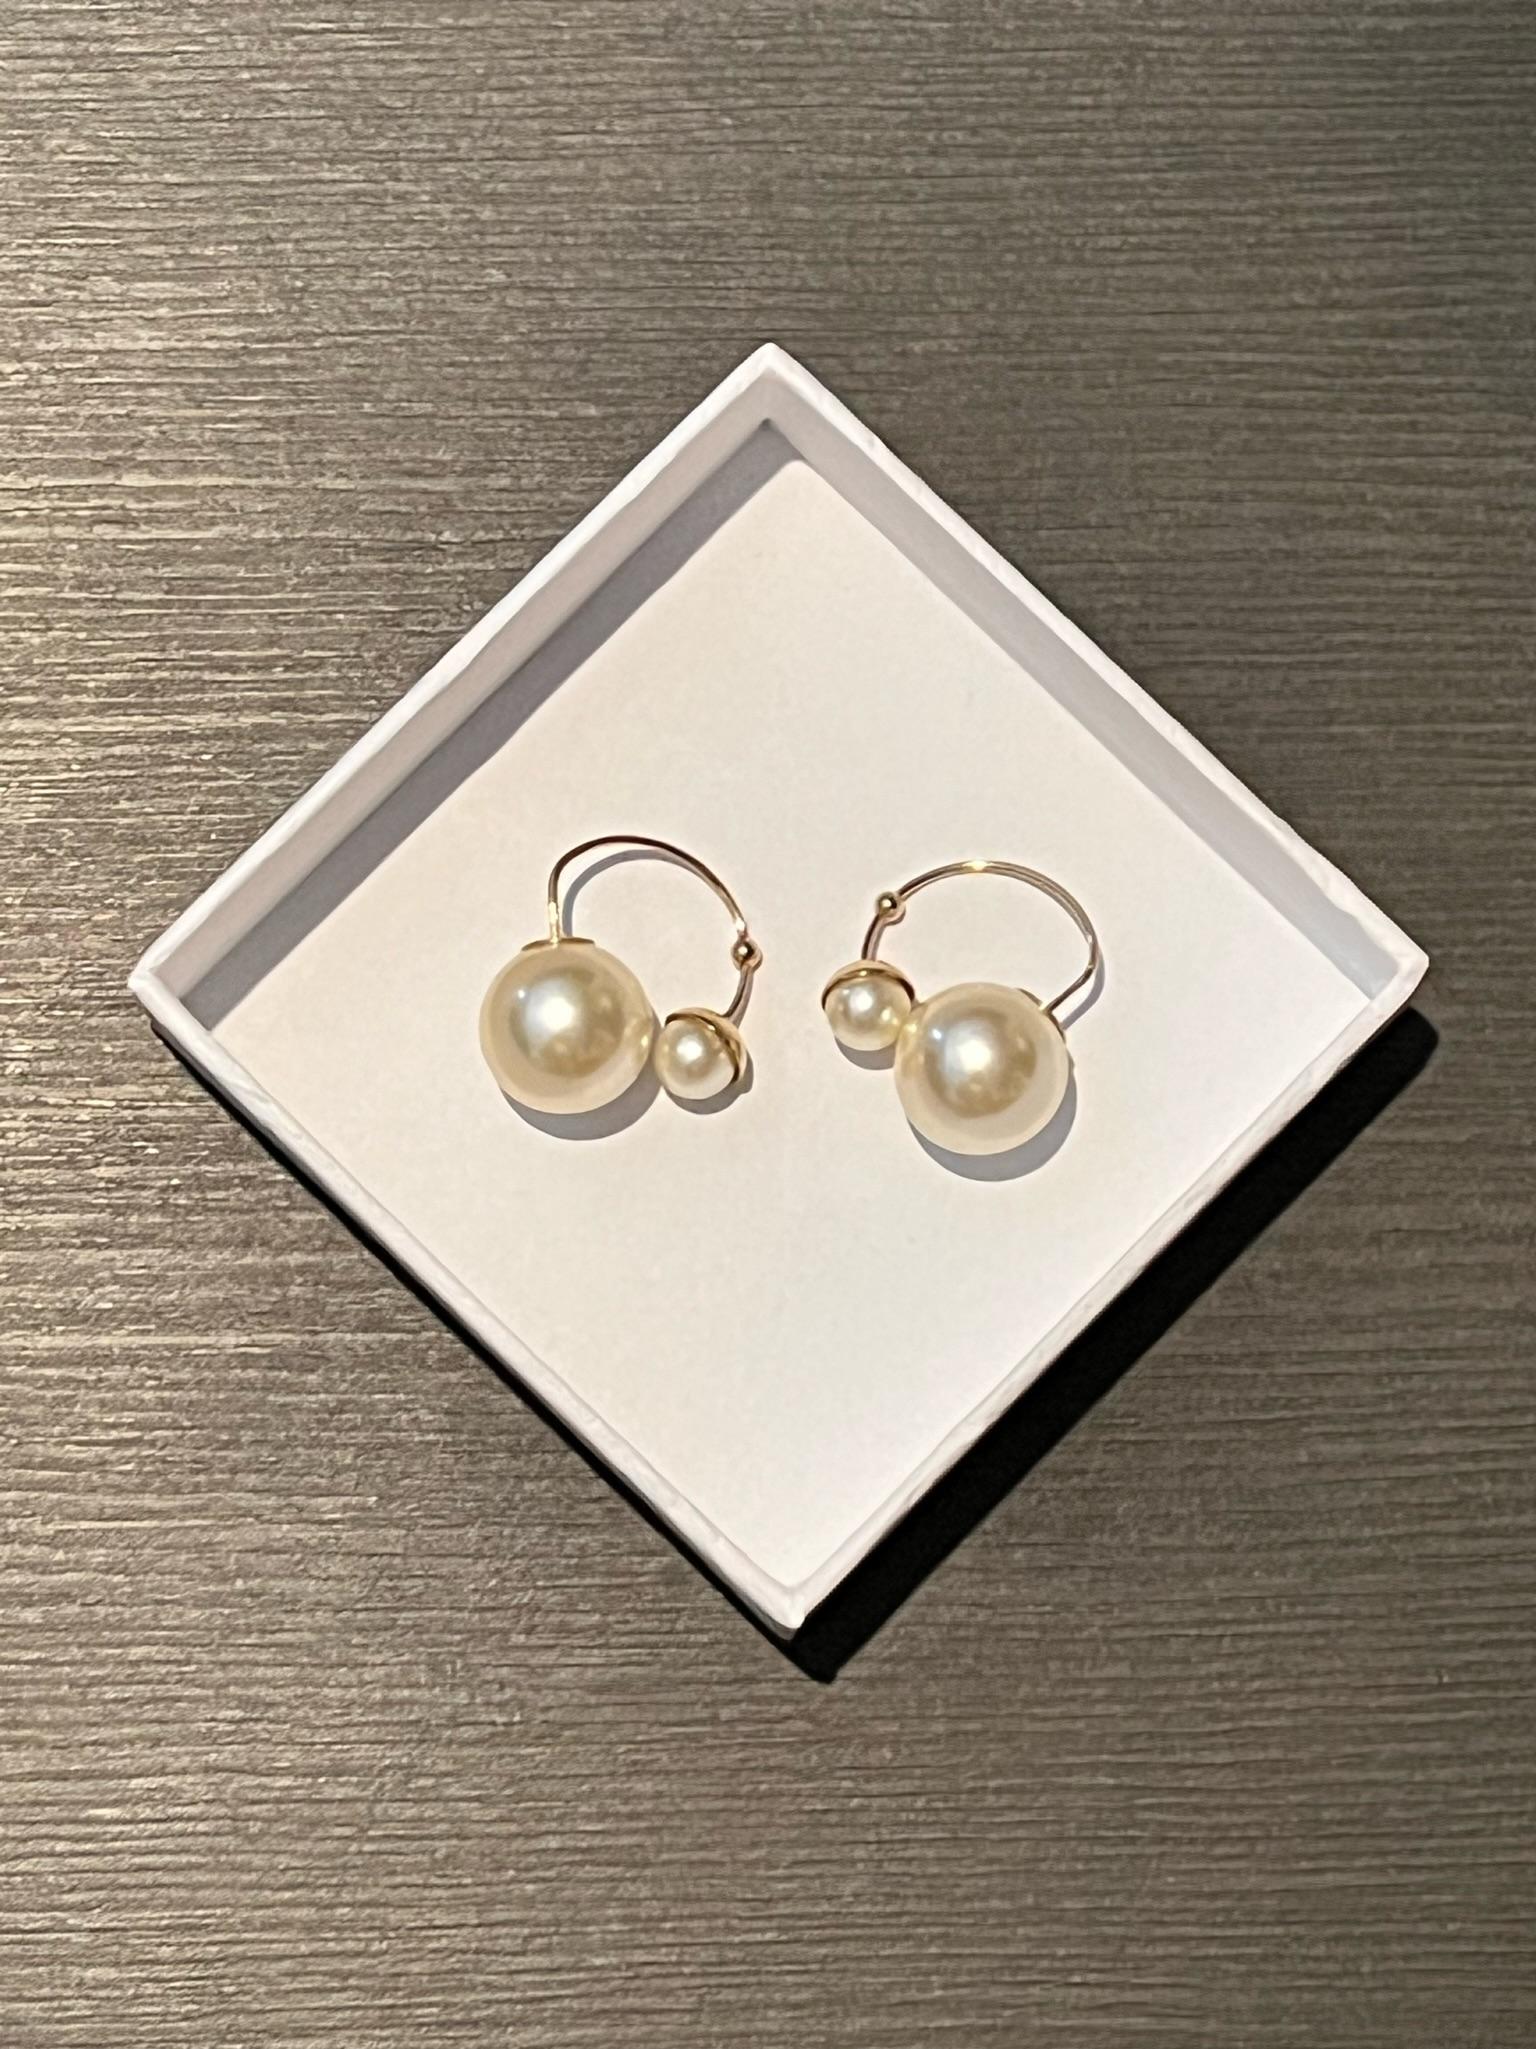 Uniquely designed in an open structured design, these 'Ultradior' earrings are a must-have.

Dior Ultradior Faux Pearl Gold Tone Half Hoop Earrings.

The perfect gift in original box.

It is made of a gold-tone metal featuring two faux pearl beads